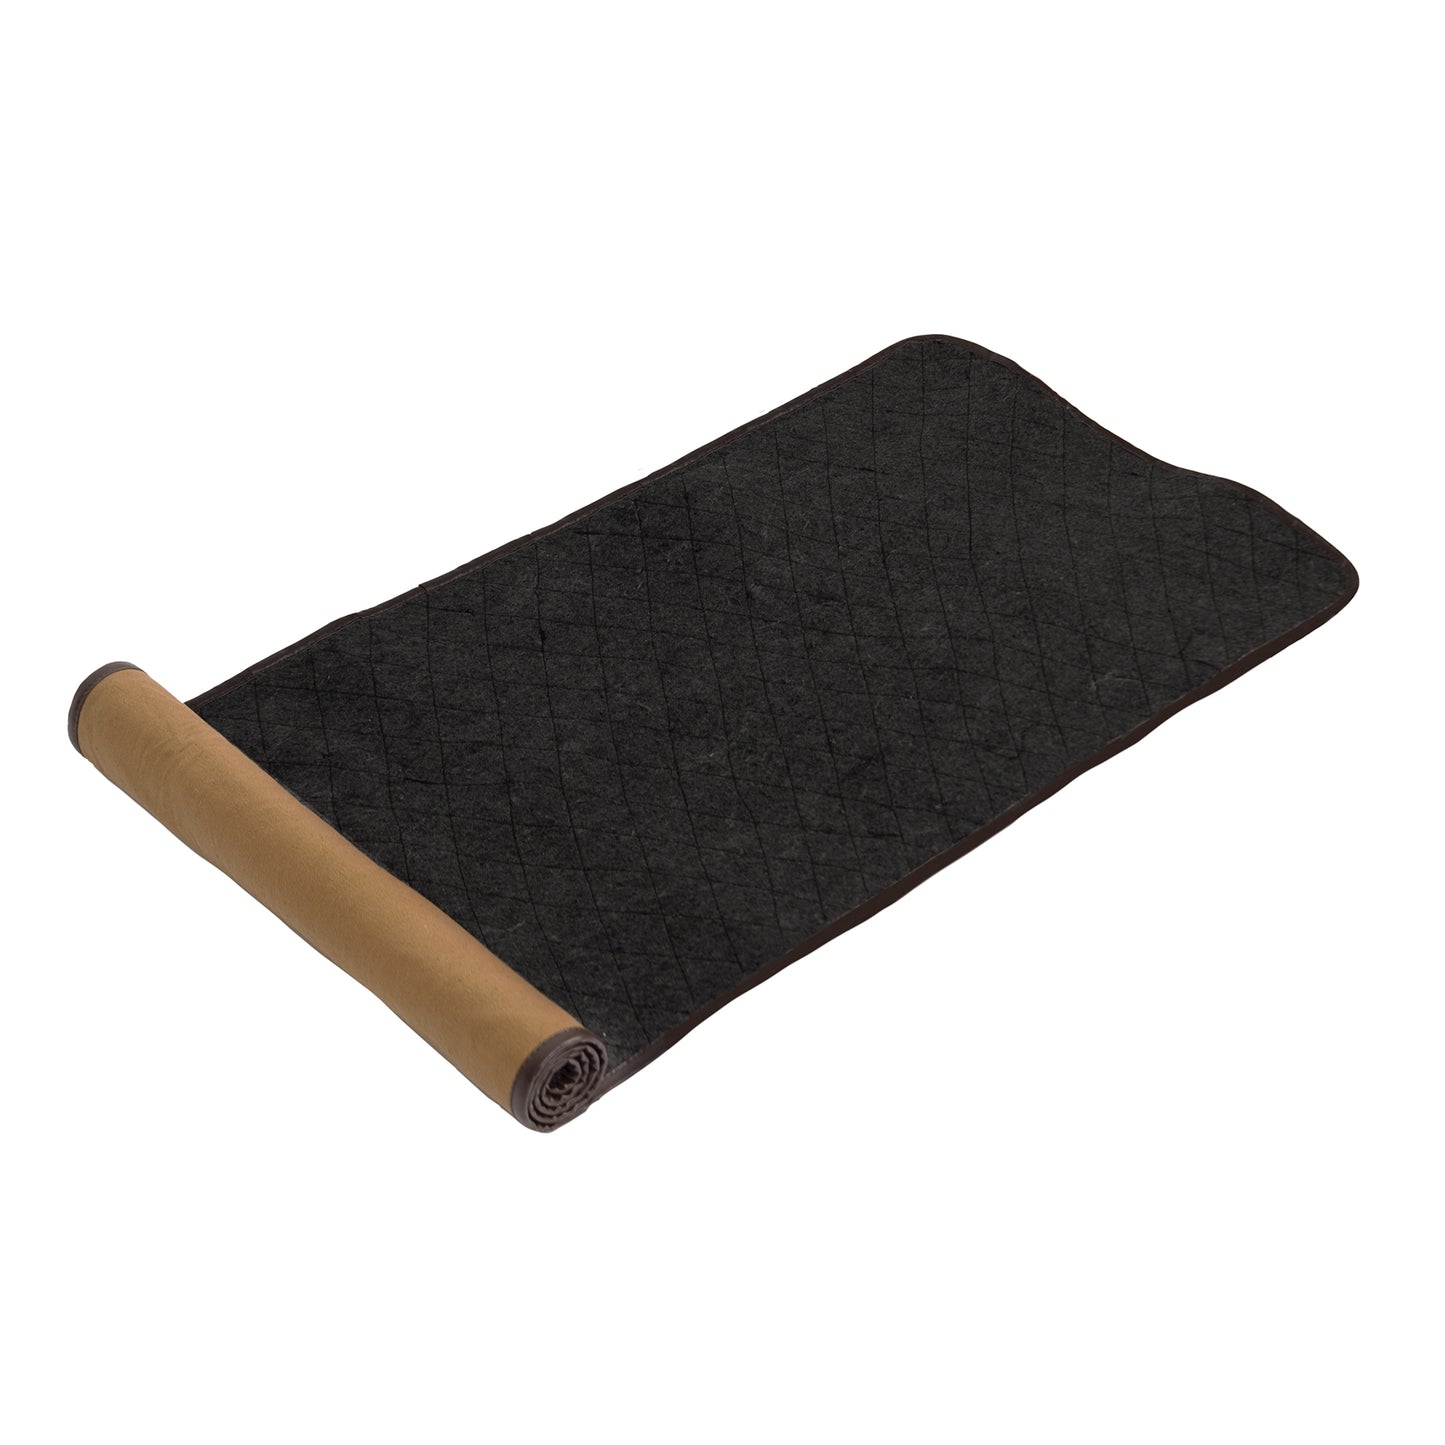 Canvas Cleaning Mat With Optional Pouch - Coyote Brown Roll-Up Gear Mat